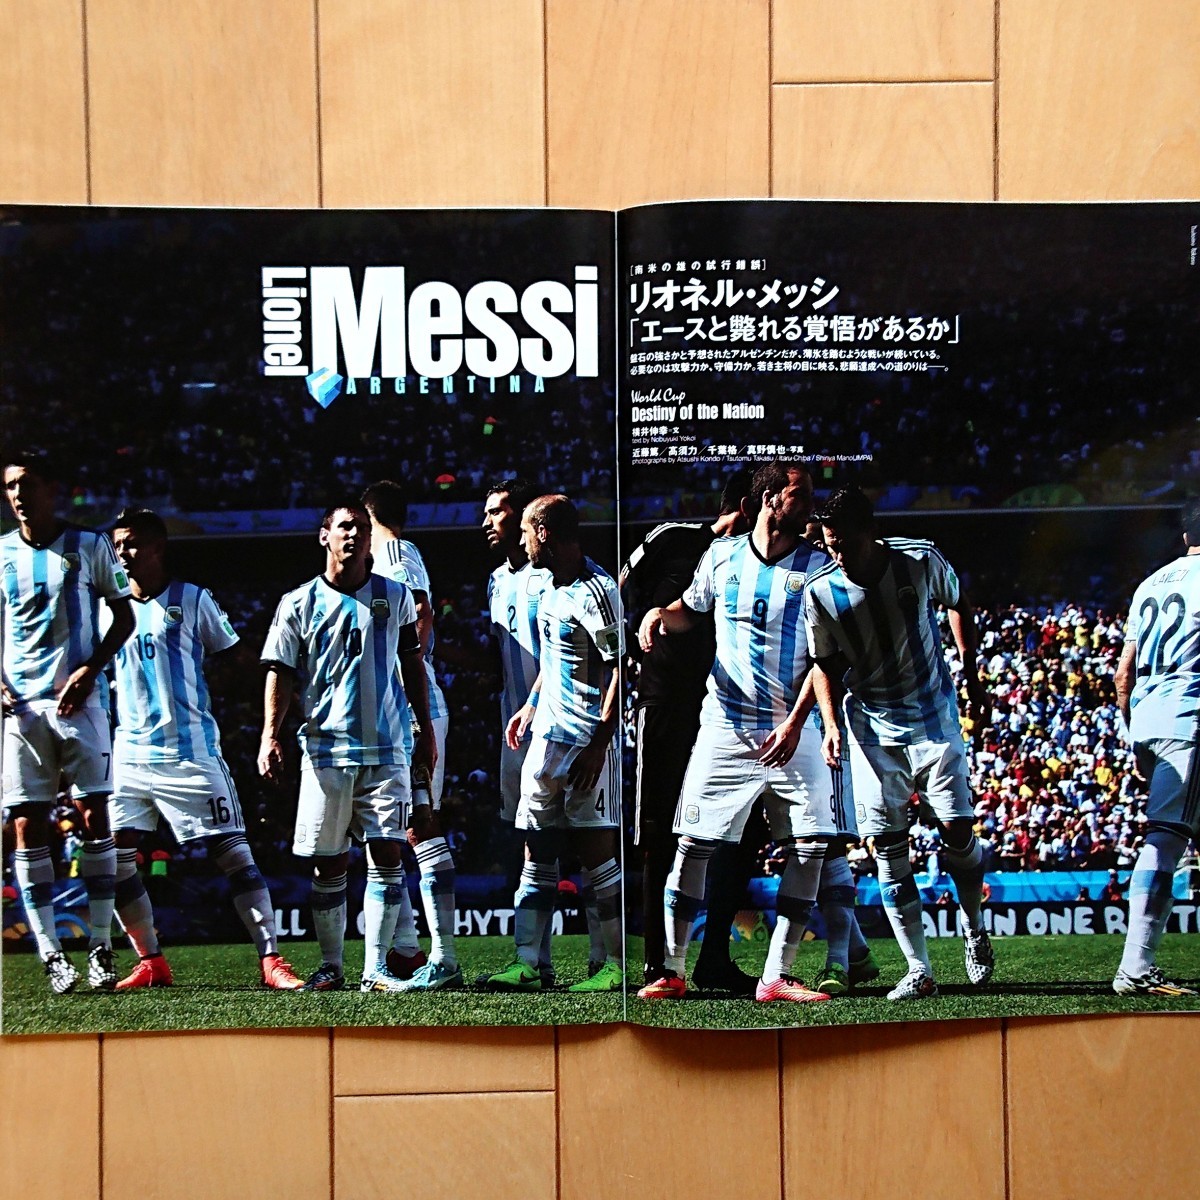 Sports Graphic Number 臨時増刊号 World Cup Brazil 2014 Special Issue ④ 8強激突 Footboal Fantas これが世界のサッカーだ。2014年7/15_画像8